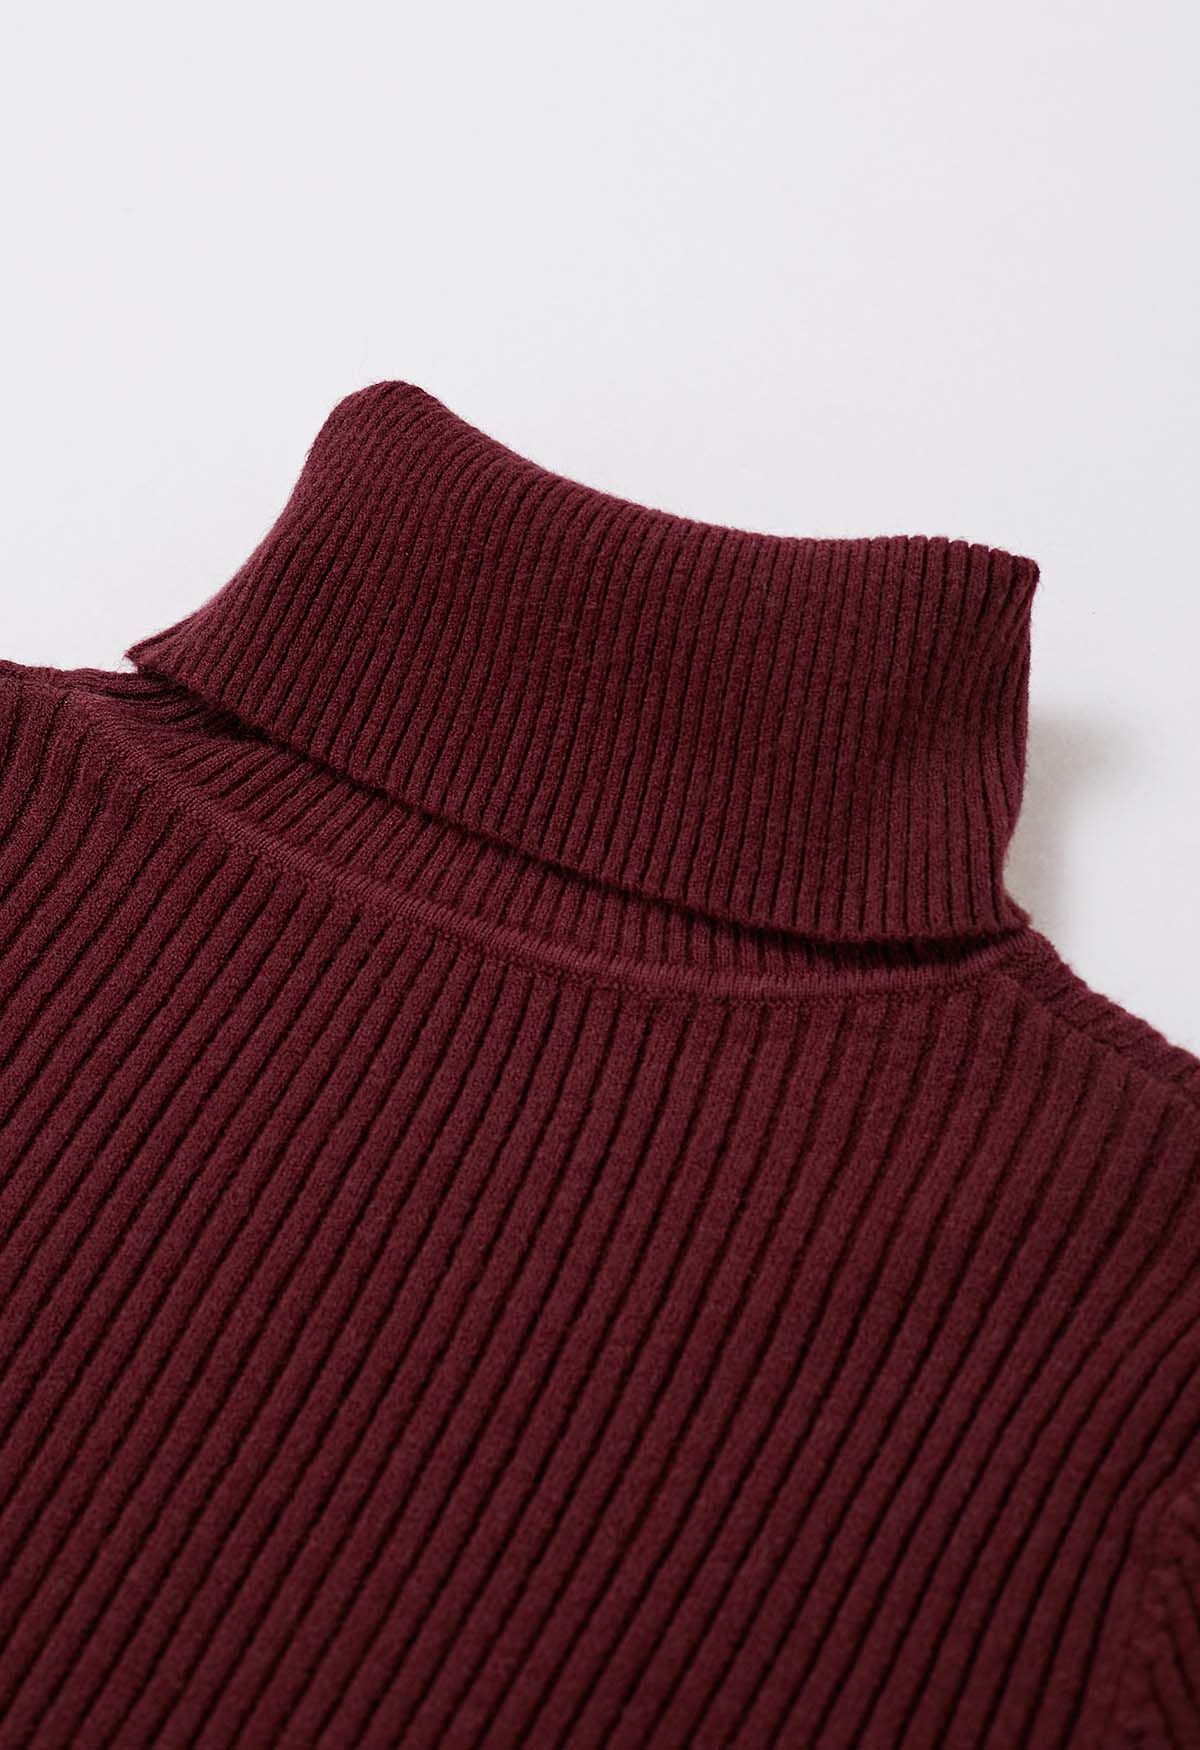 Turtleneck Ribbed Fitted Knit Top in Burgundy - Retro, Indie and Unique ...